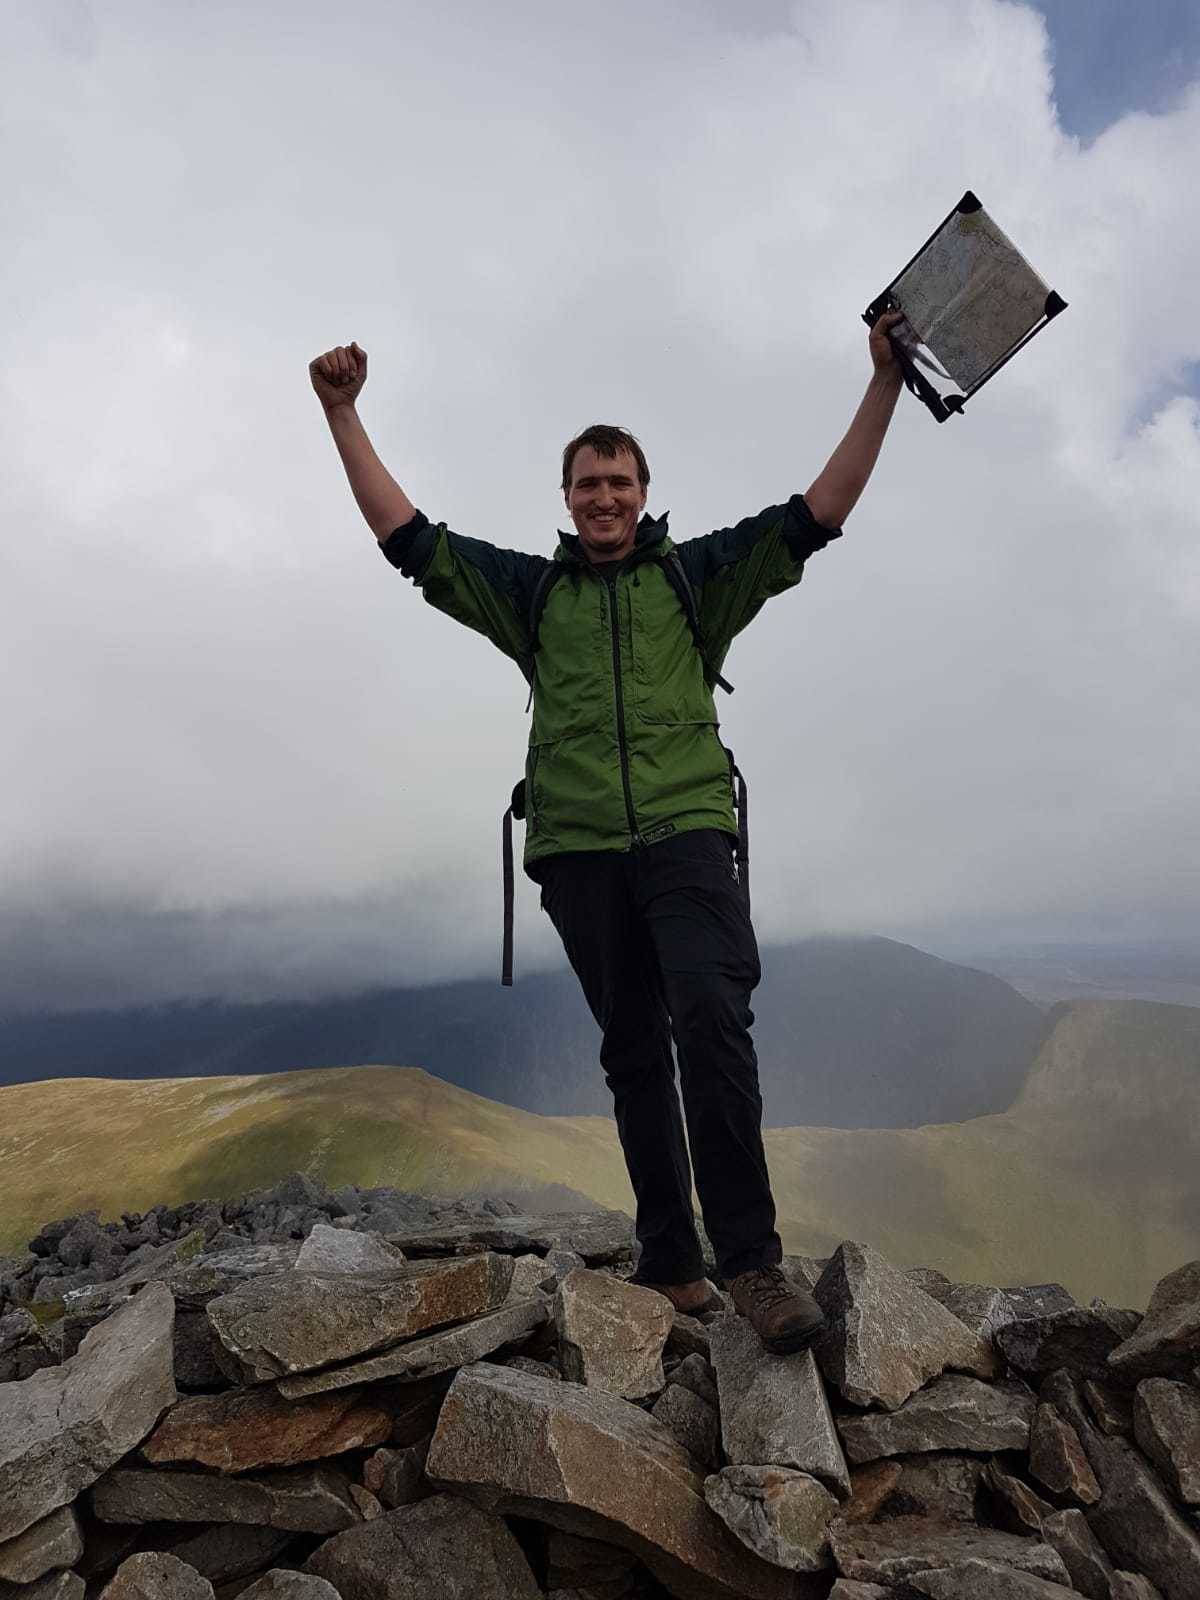 A photograph of a man standing at the top of a mountain with a map in his hand